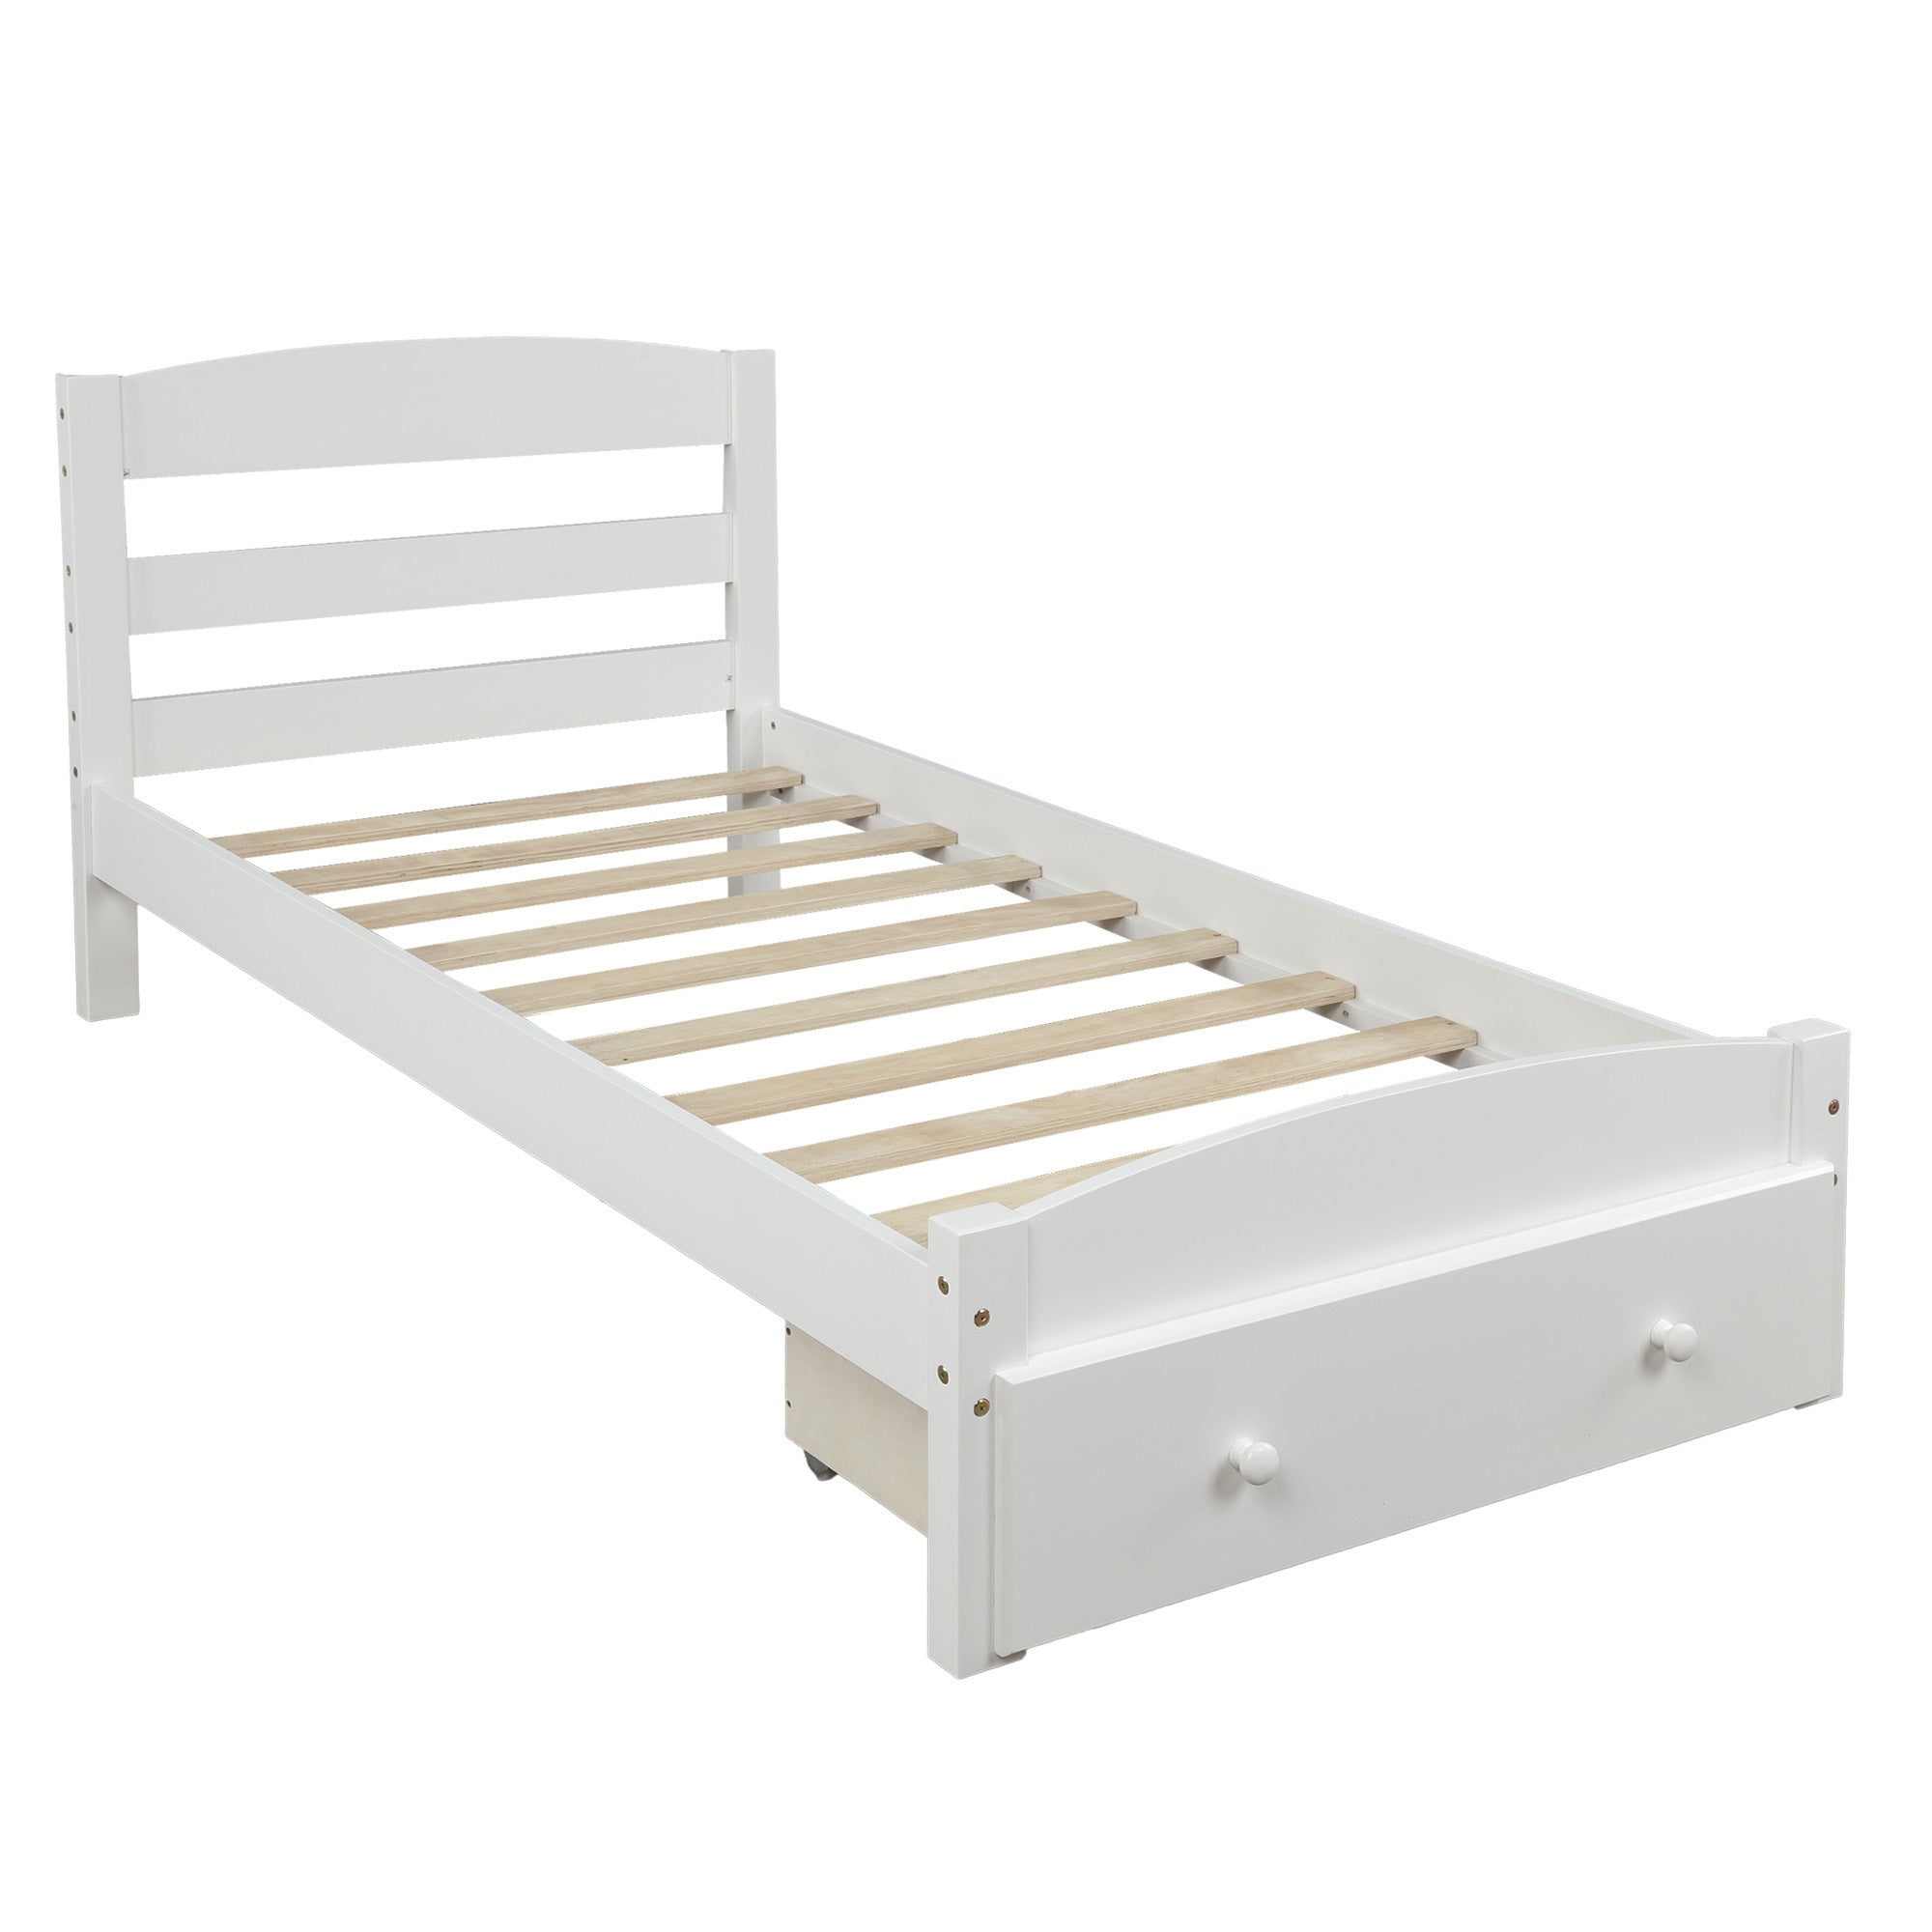 ZNTS Platform Twin Bed Frame with Storage Drawer and Wood Slat Support No Box Spring Needed, White WF191655AAK